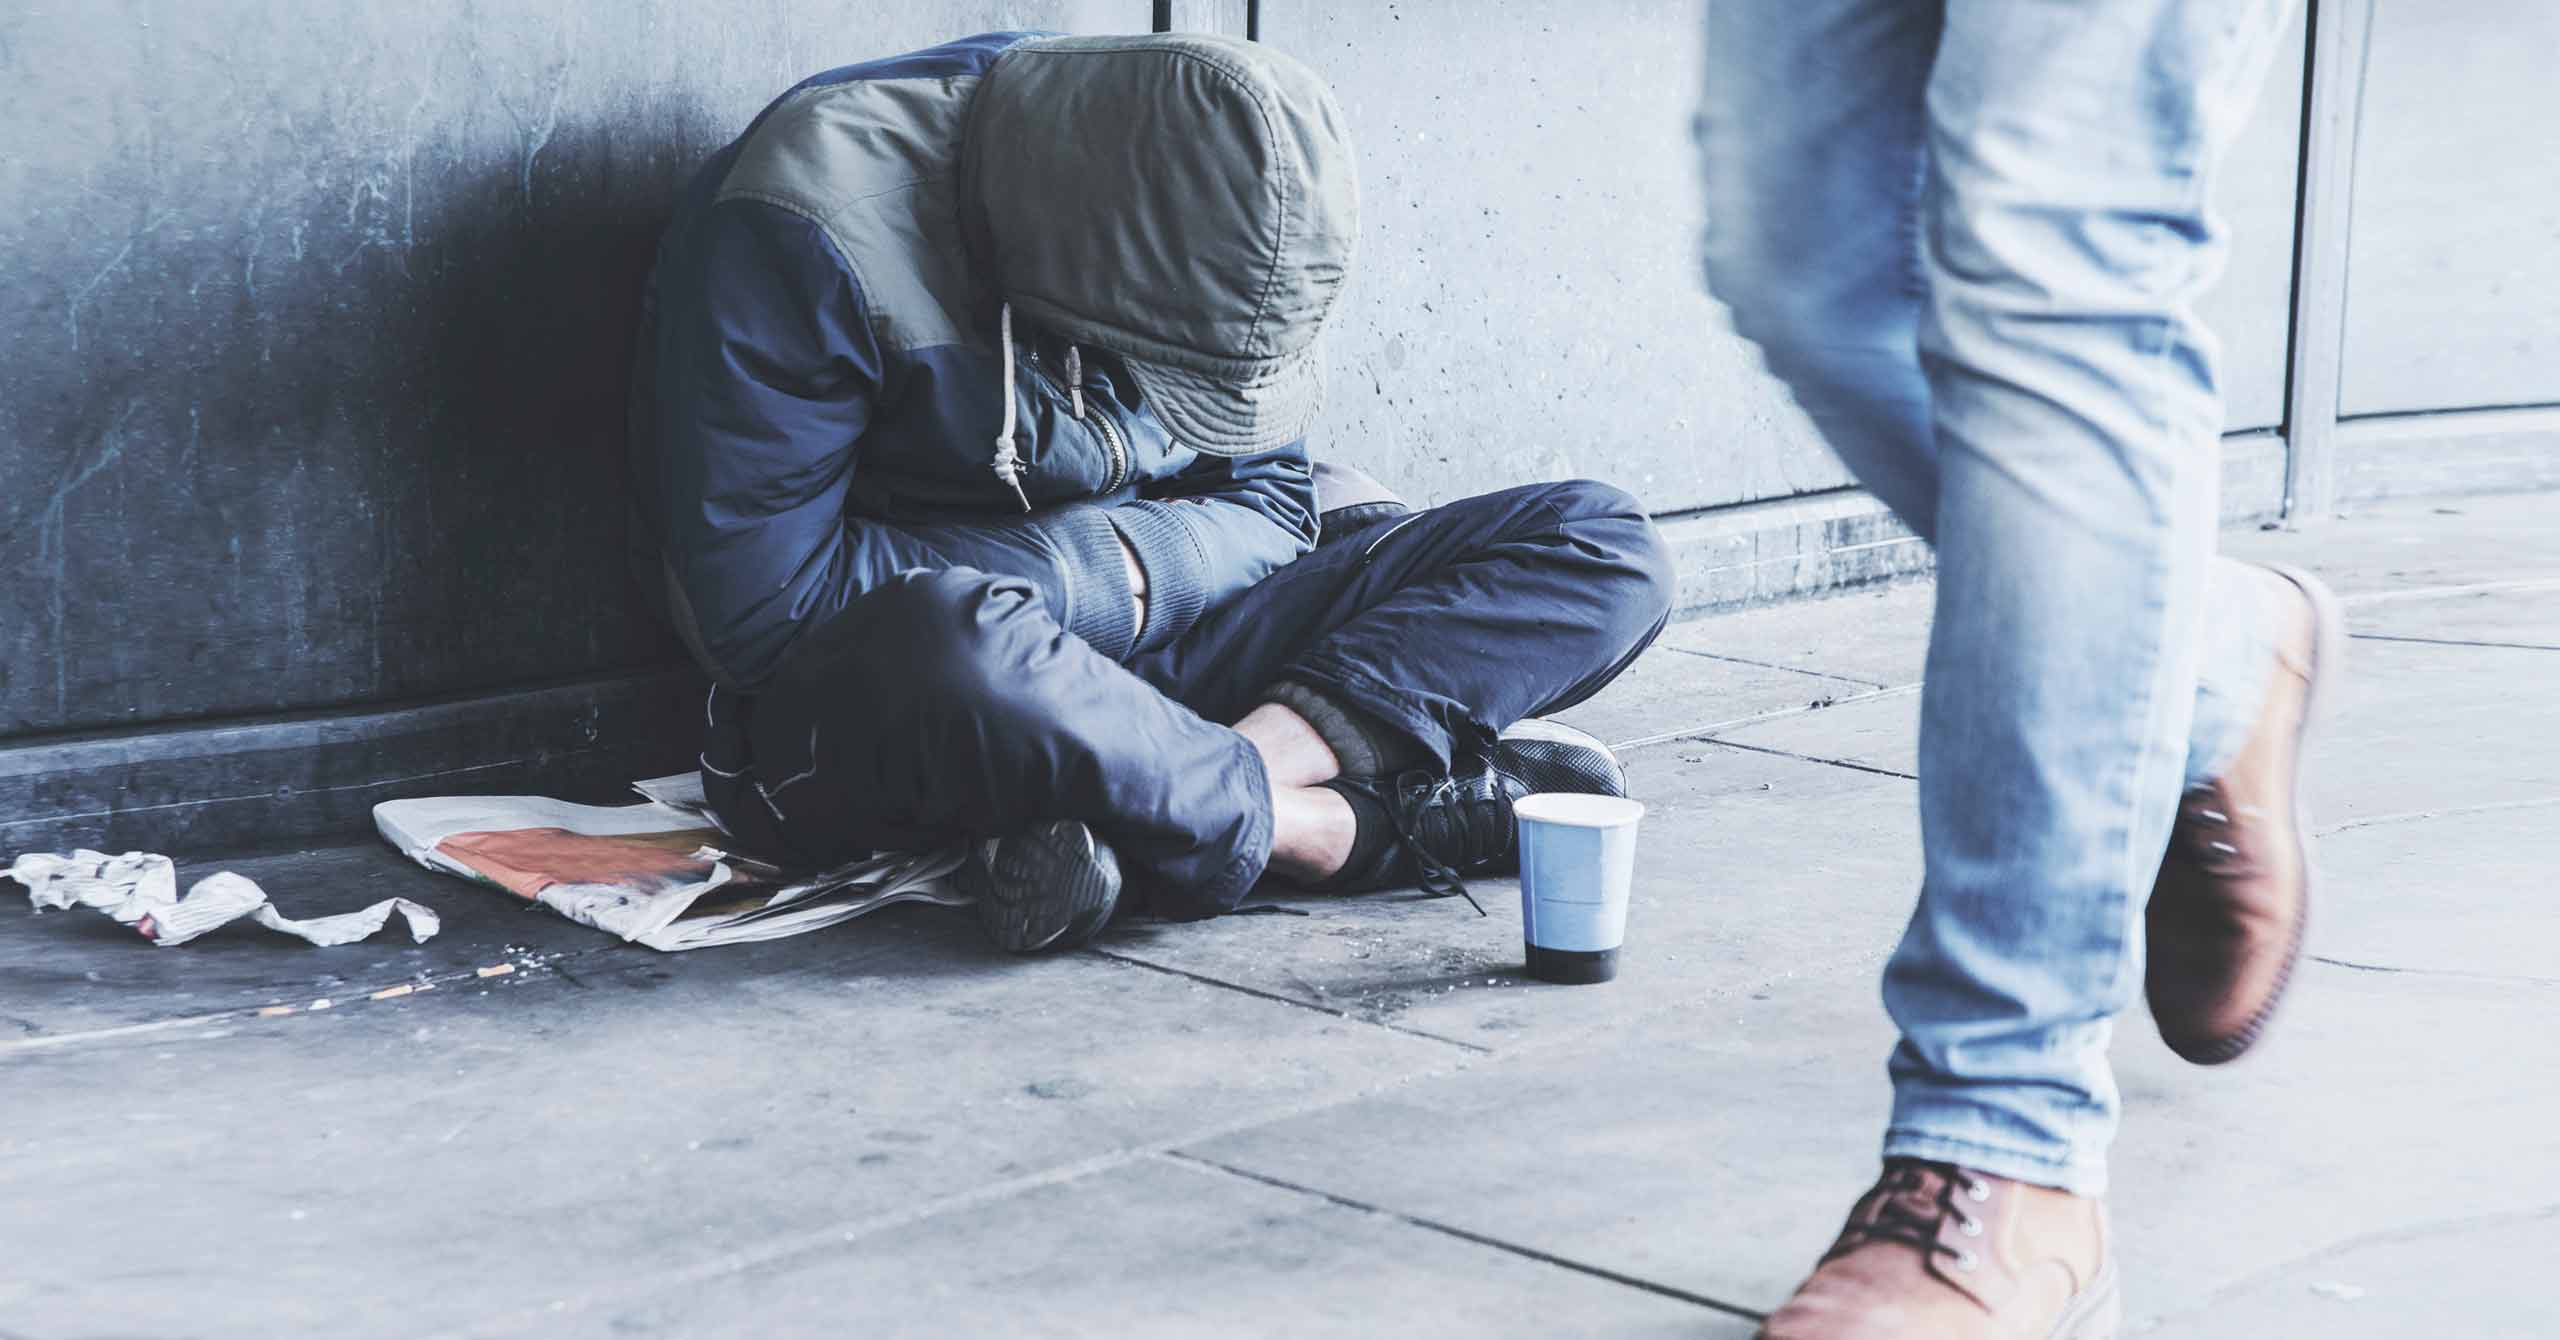 Want to help the homeless? Embrace Medicaid expansion.